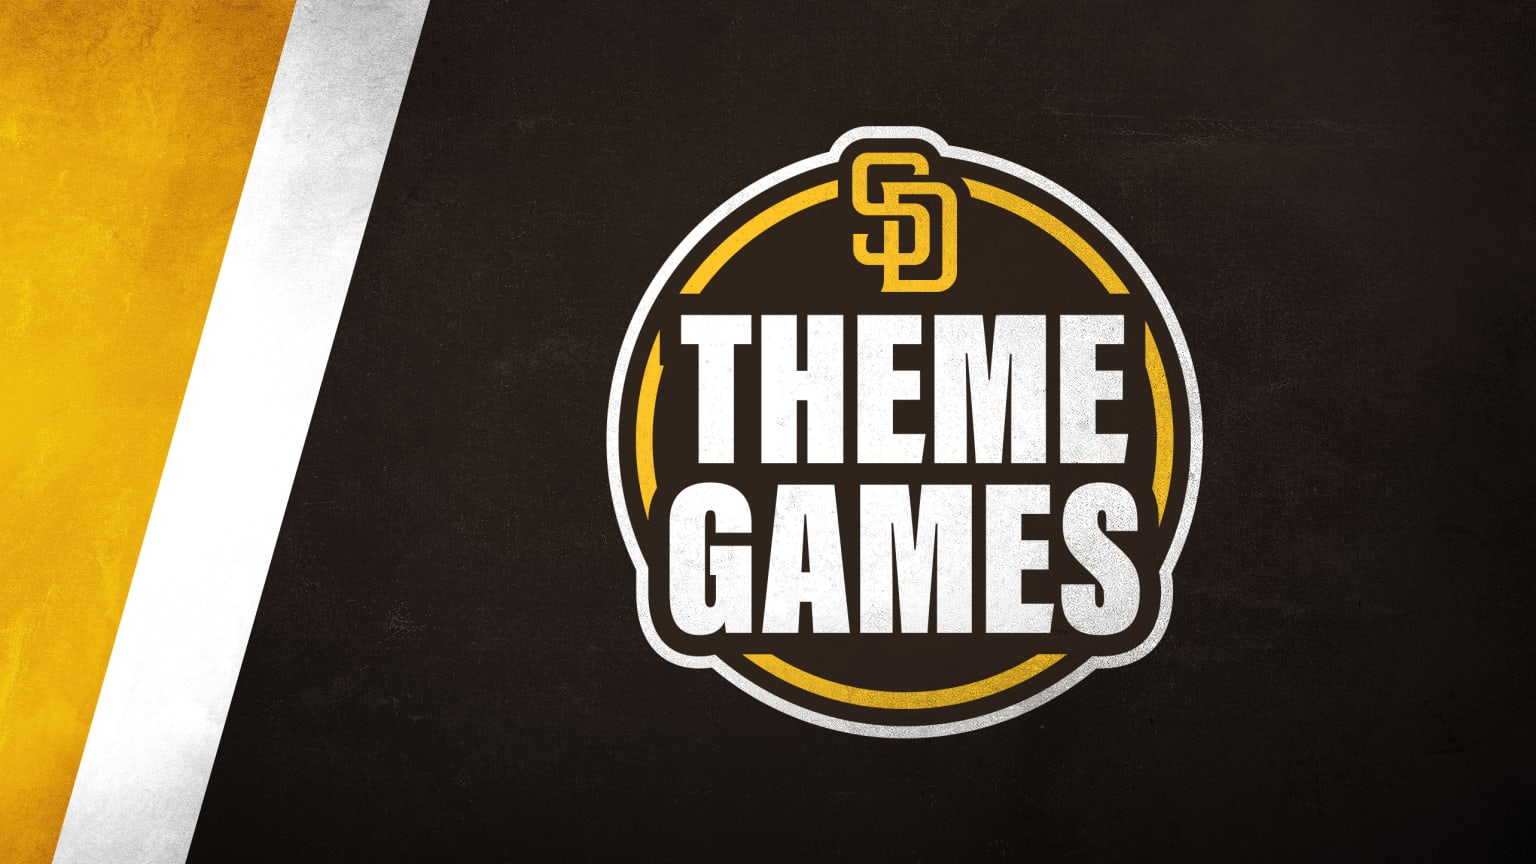 Bobbleheads, hats, and more: San Diego Padres 2023 home game giveaways